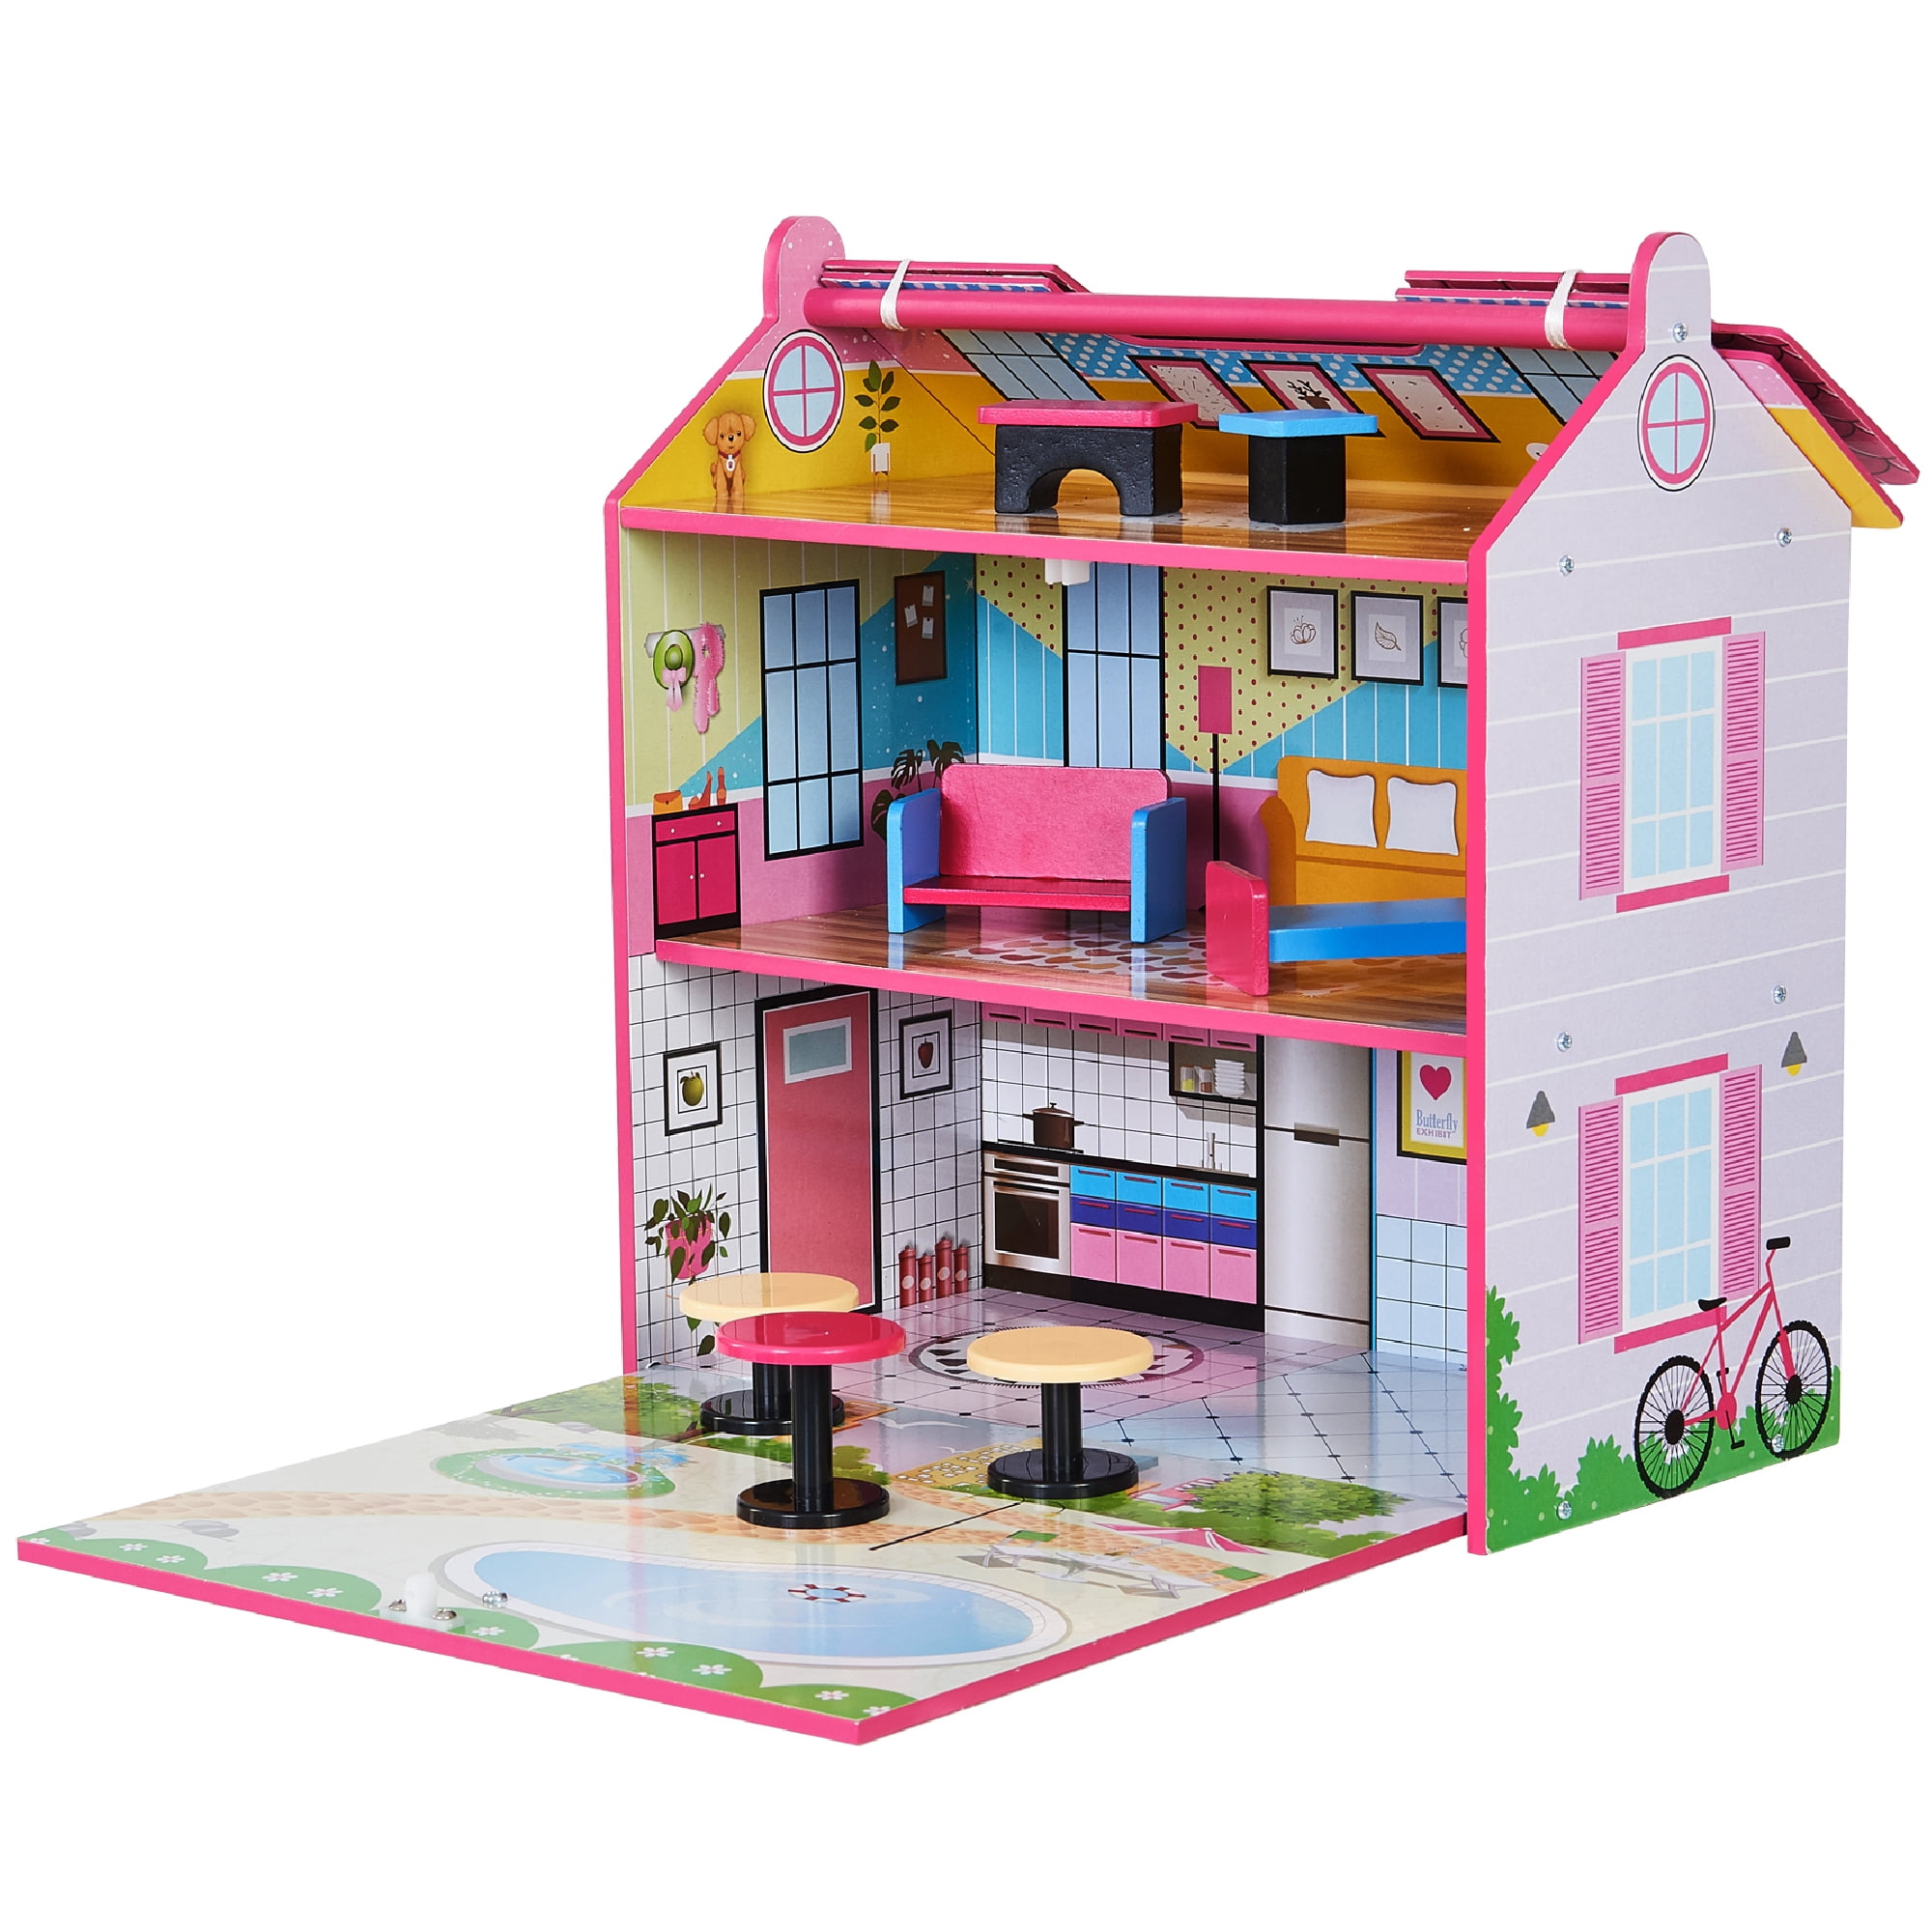 Freedom Poster Miniature Dollhouse Doll House Picture 